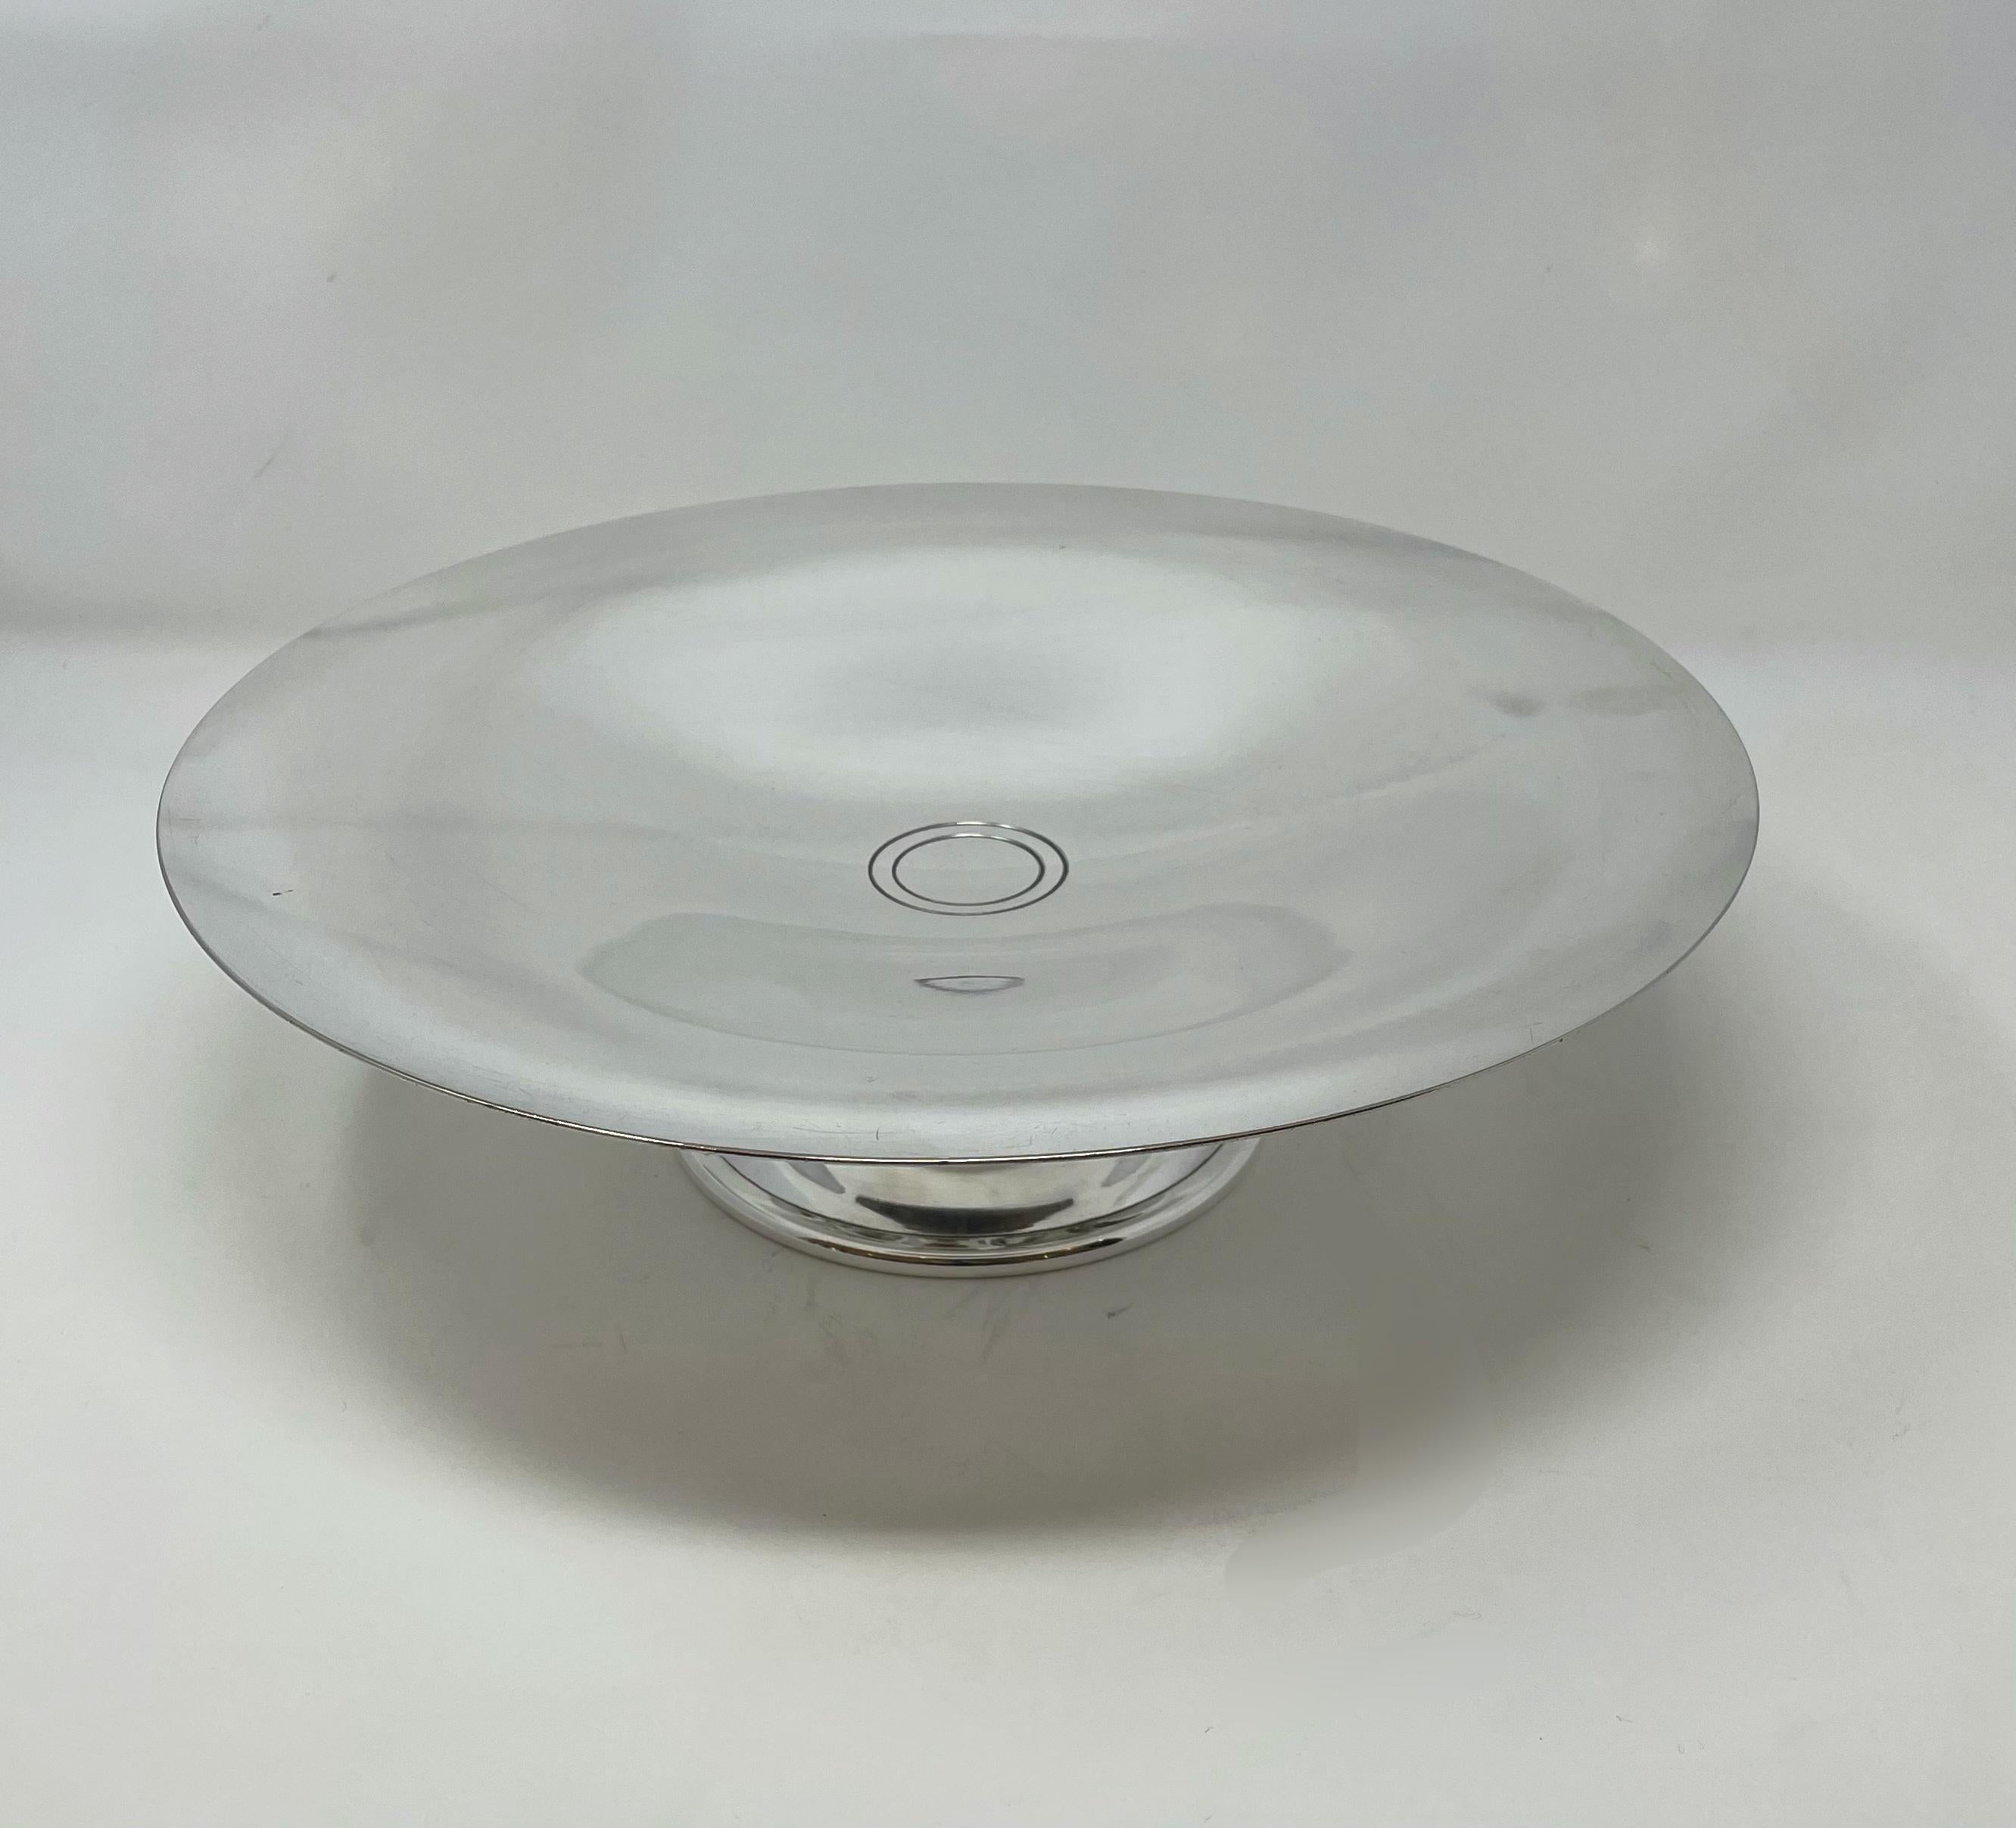 Silvered Art Deco Bowl by Luc Lanel for Christofle, Designed for the Normandie, 1930s